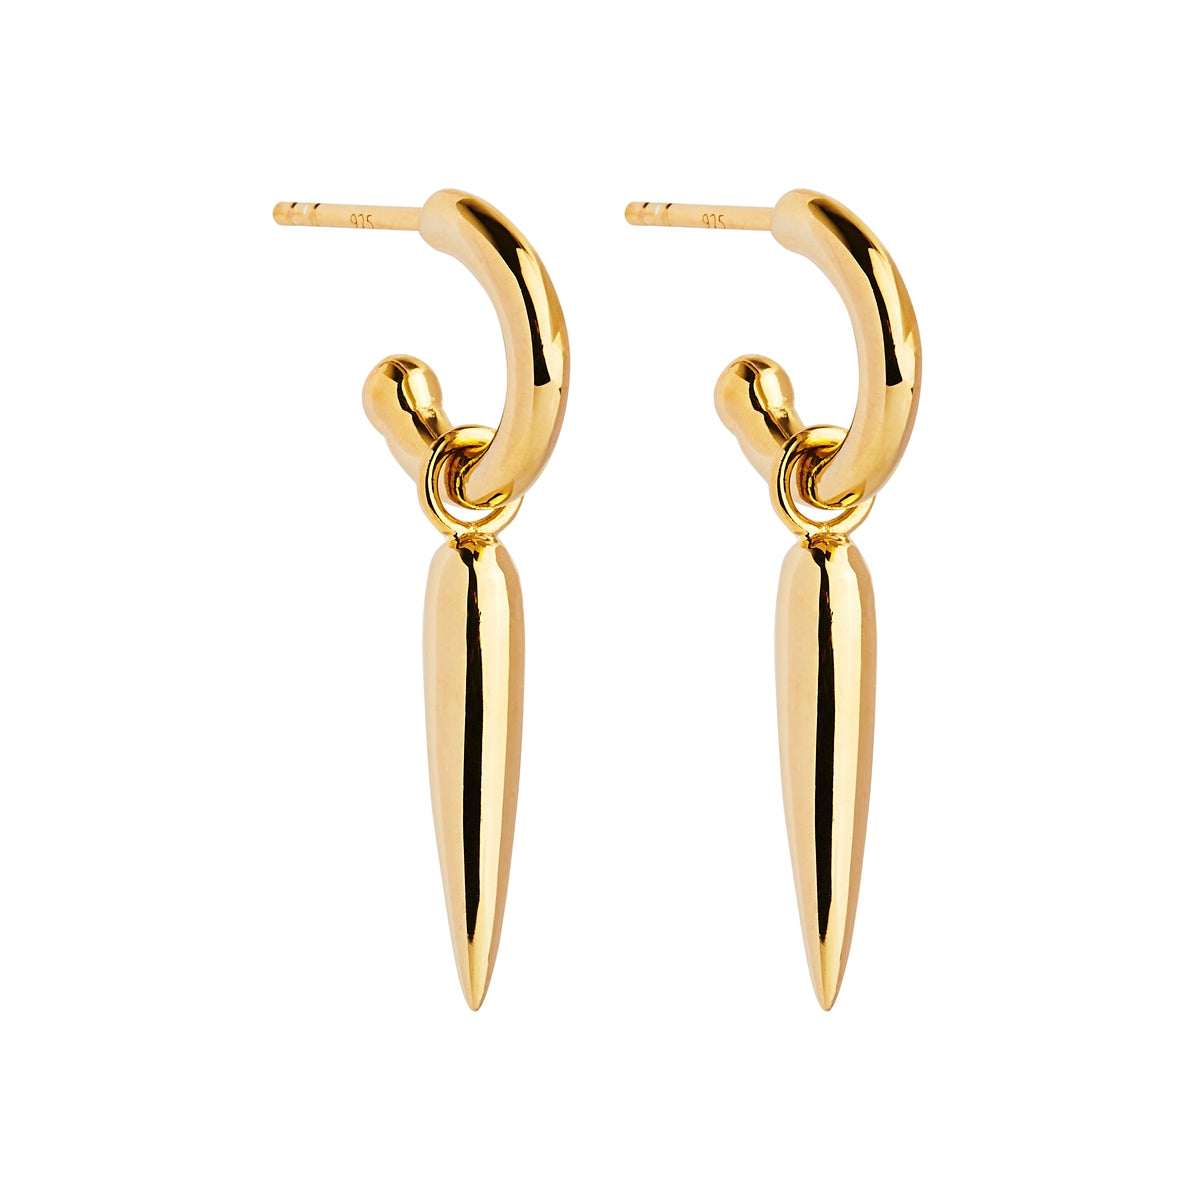 4X30mm, Yellow Gold Plated Silver Chilli Charm Hanging From 2X12mm Stud Hoop Earrings